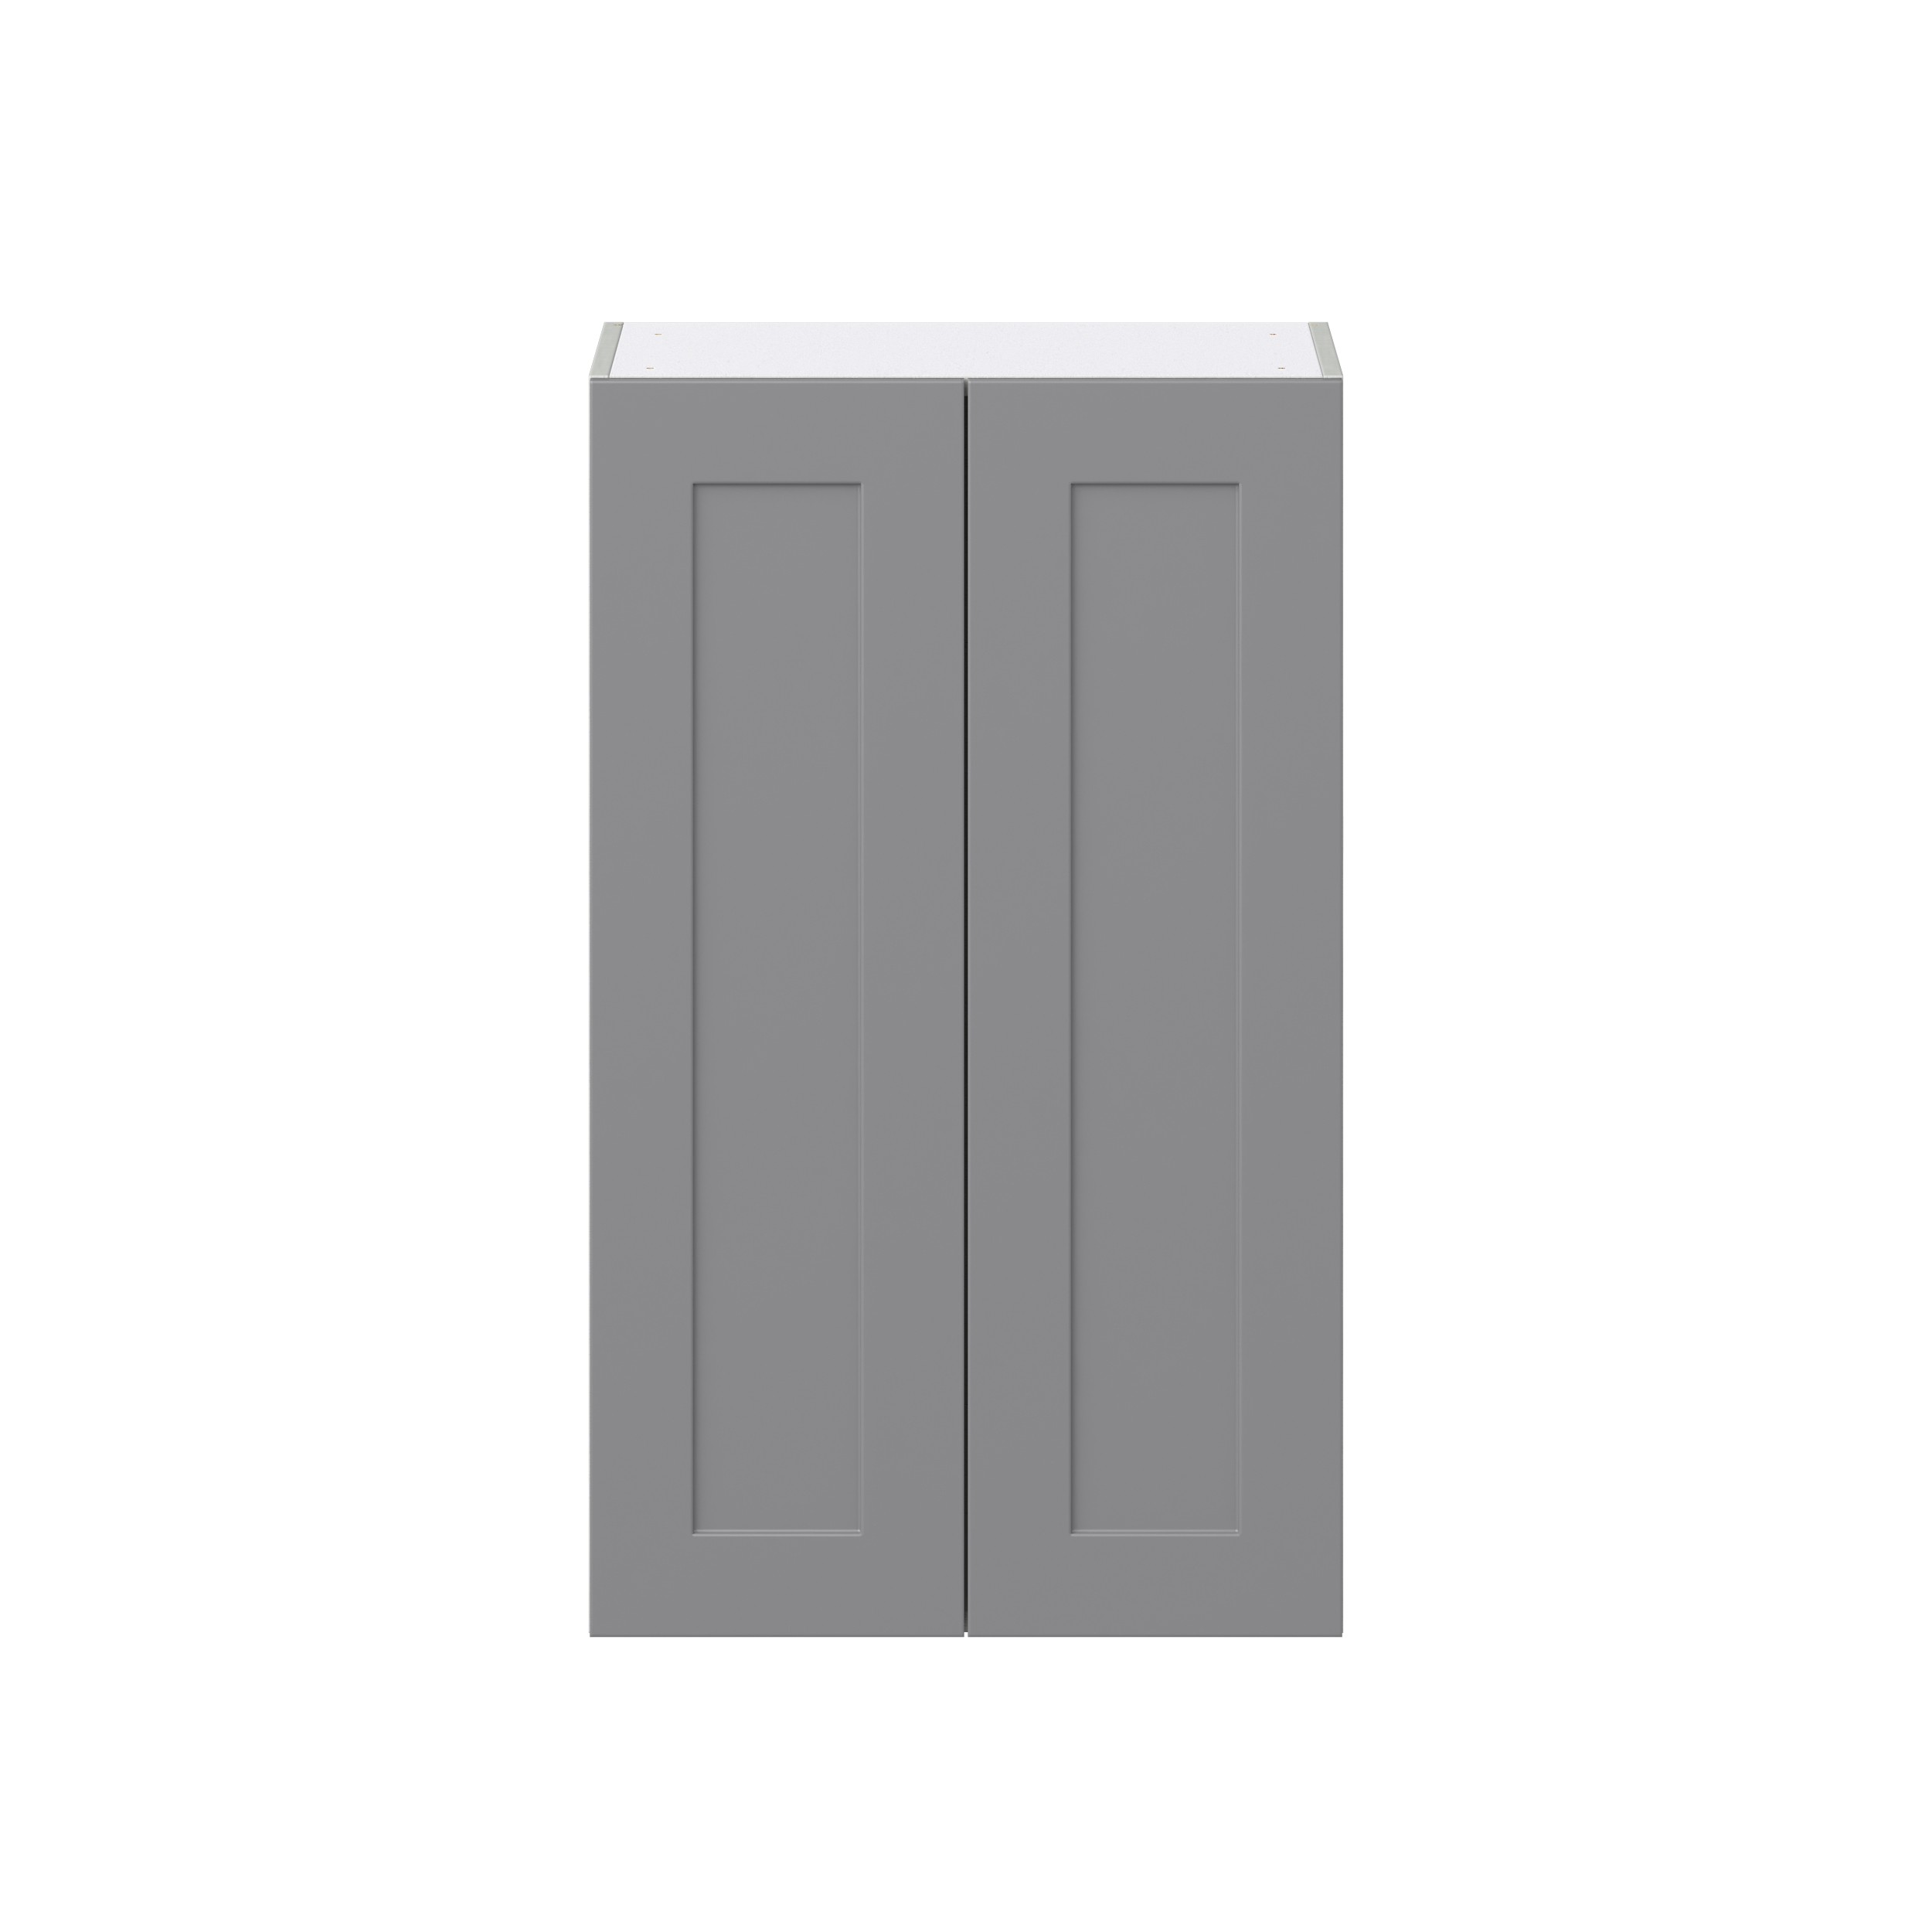 Willow Painted Slate Gray Shaker Assembled Wall Cabinet with 2 Full High Doors (24 in. W x 40 in. H x 14 in. D)